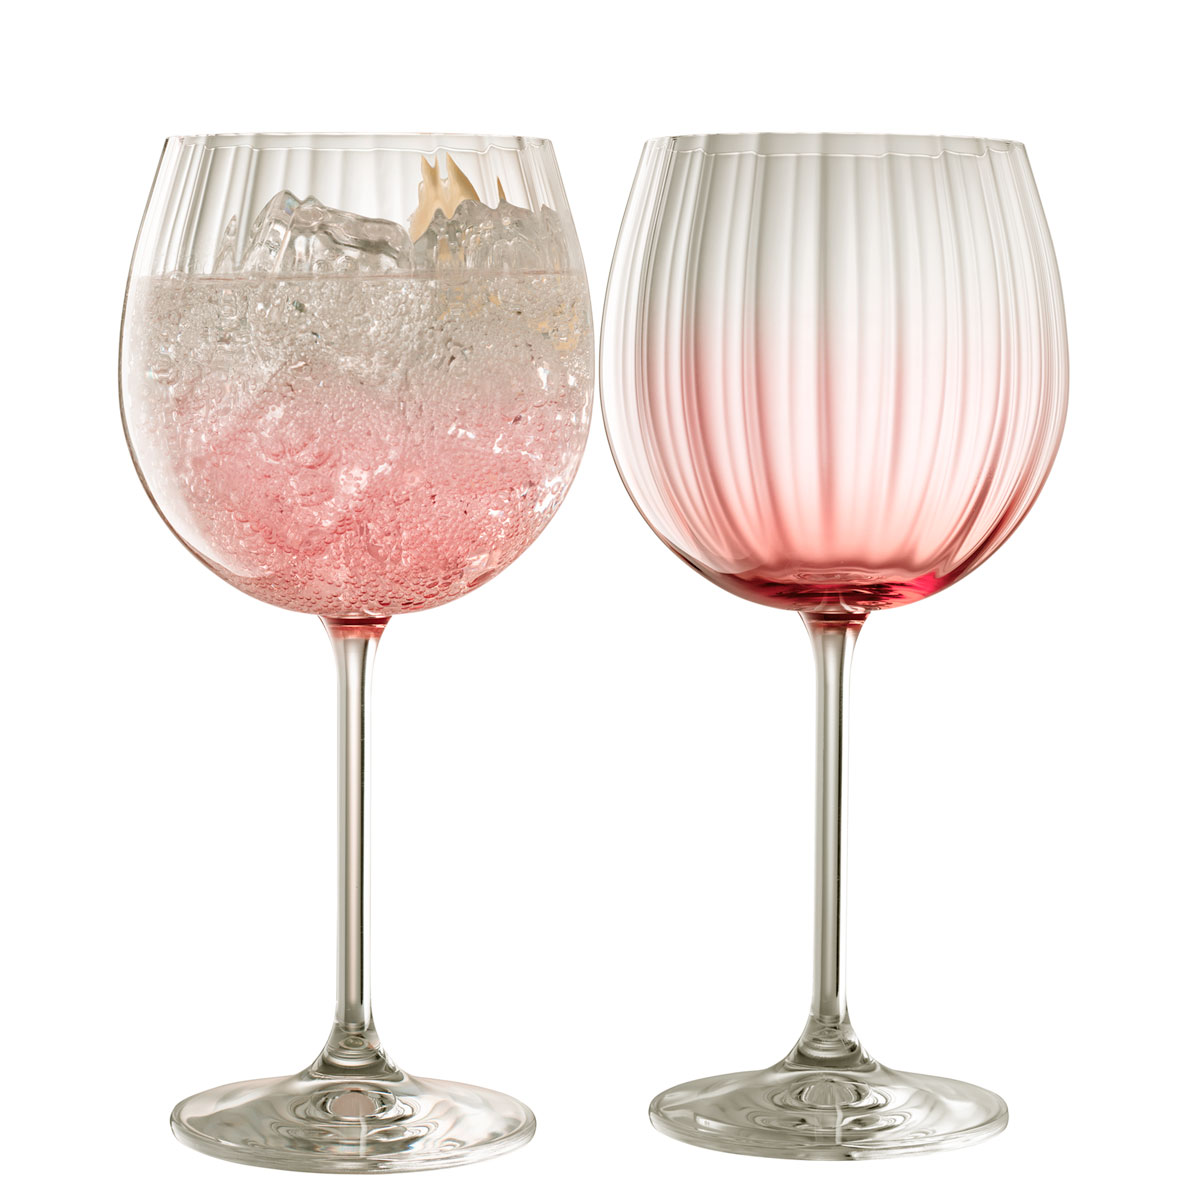 Galway Erne Gin and Tonic Pair - Blush